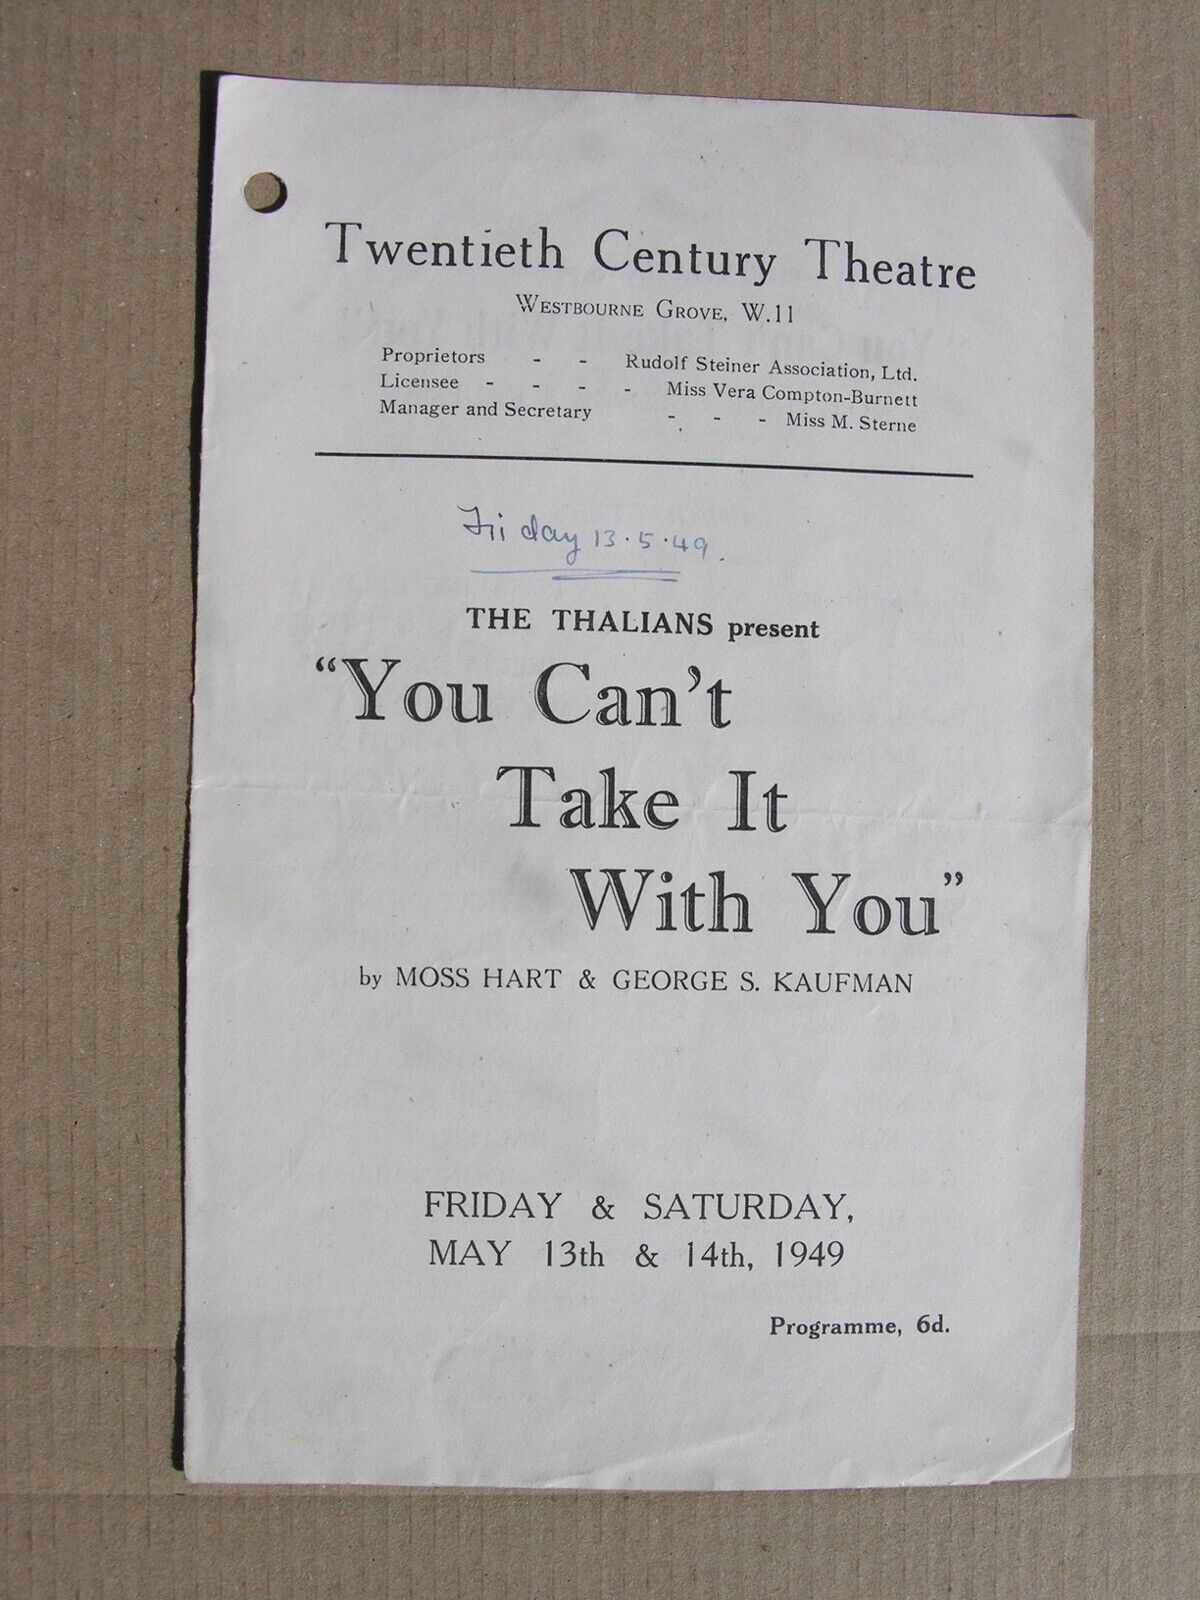 1949 YOU CAN’T TAKE IT WITH YOU, The Thalians, Twentieth Century Theatre